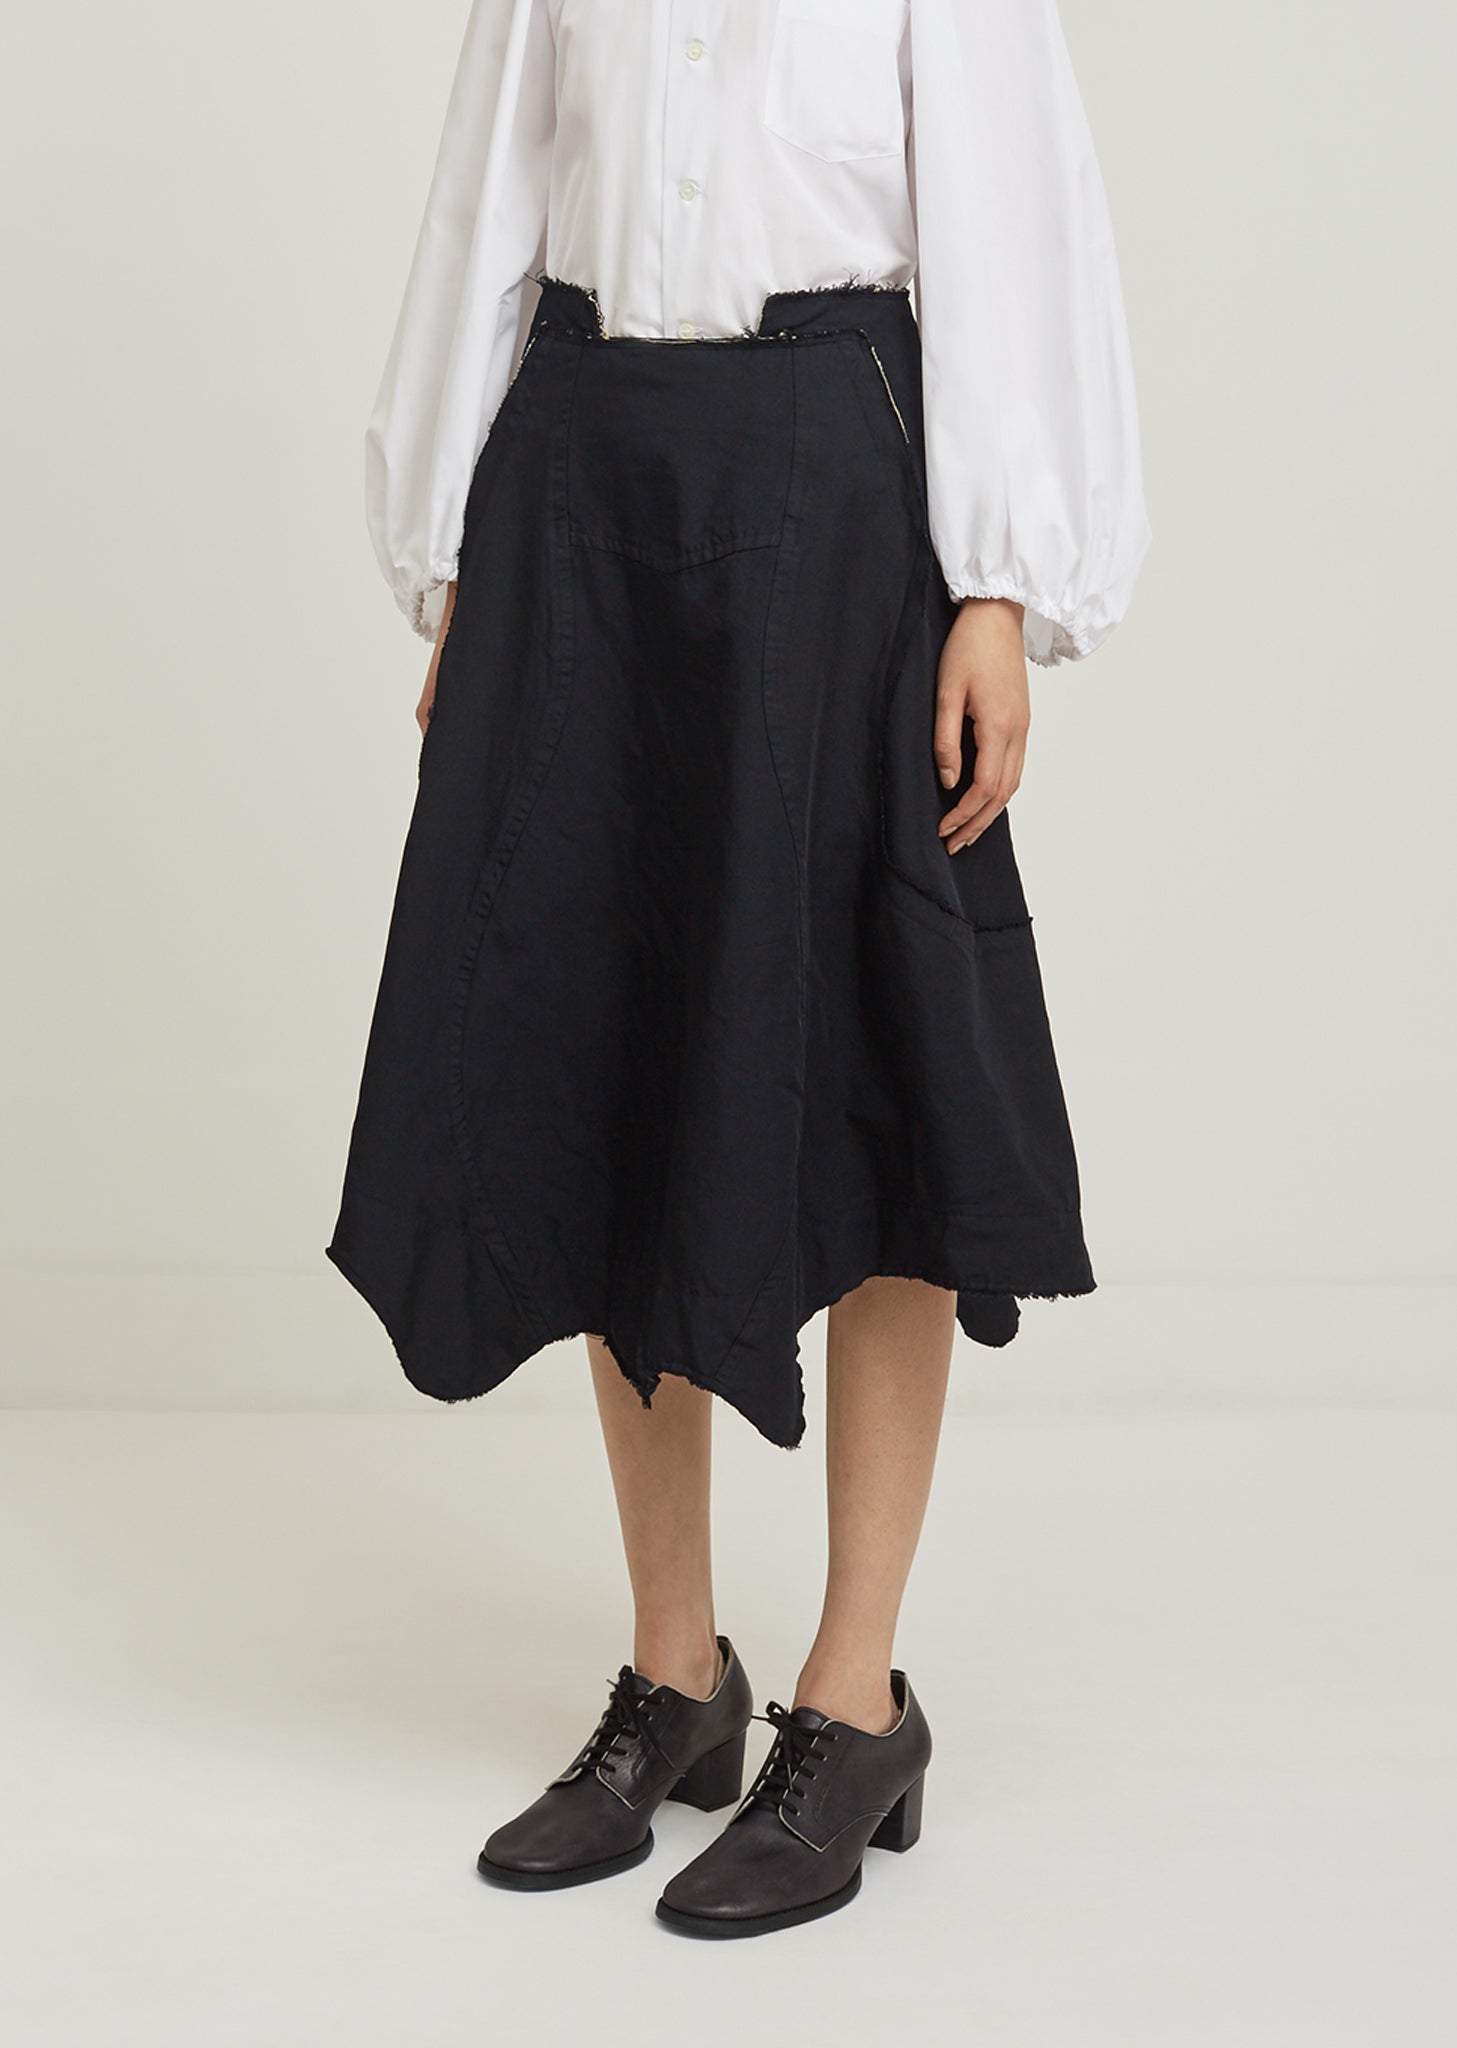 Polyester Twill Garment Treated Skirt by Comme des Garçons- La 